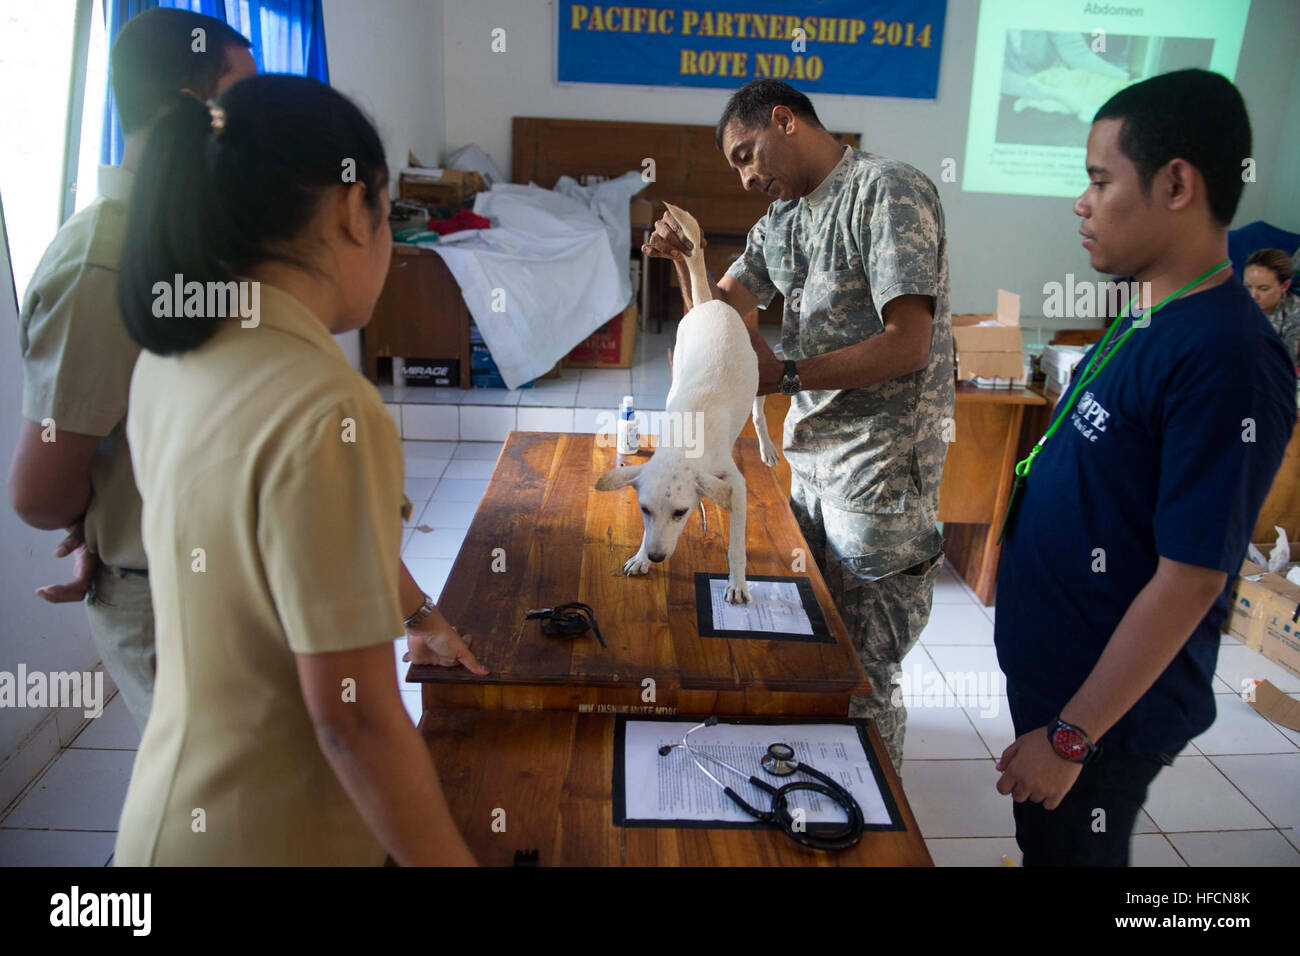 U.S. Army Maj. Raghavan Sampathkumaran, a veterinarian from Lompoc, Calif., assigned to the 109th Medical Detachment Veterinary Services, demonstrates a pre-surgery physical examination on a dog for Indonesian animal doctors and veterinarian medics as part of a veterinarian subject matter expert exchange at Dinas Peternakan Rote Ndao veterinarian clinic in Ba'a, Indonesia, during Pacific Partnership 2014. Pacific Partnership is in its ninth iteration and is the largest annual multilateral humanitarian assistance and disaster relief preparedness mission conducted in the Asia-Pacific region. (U. Stock Photo